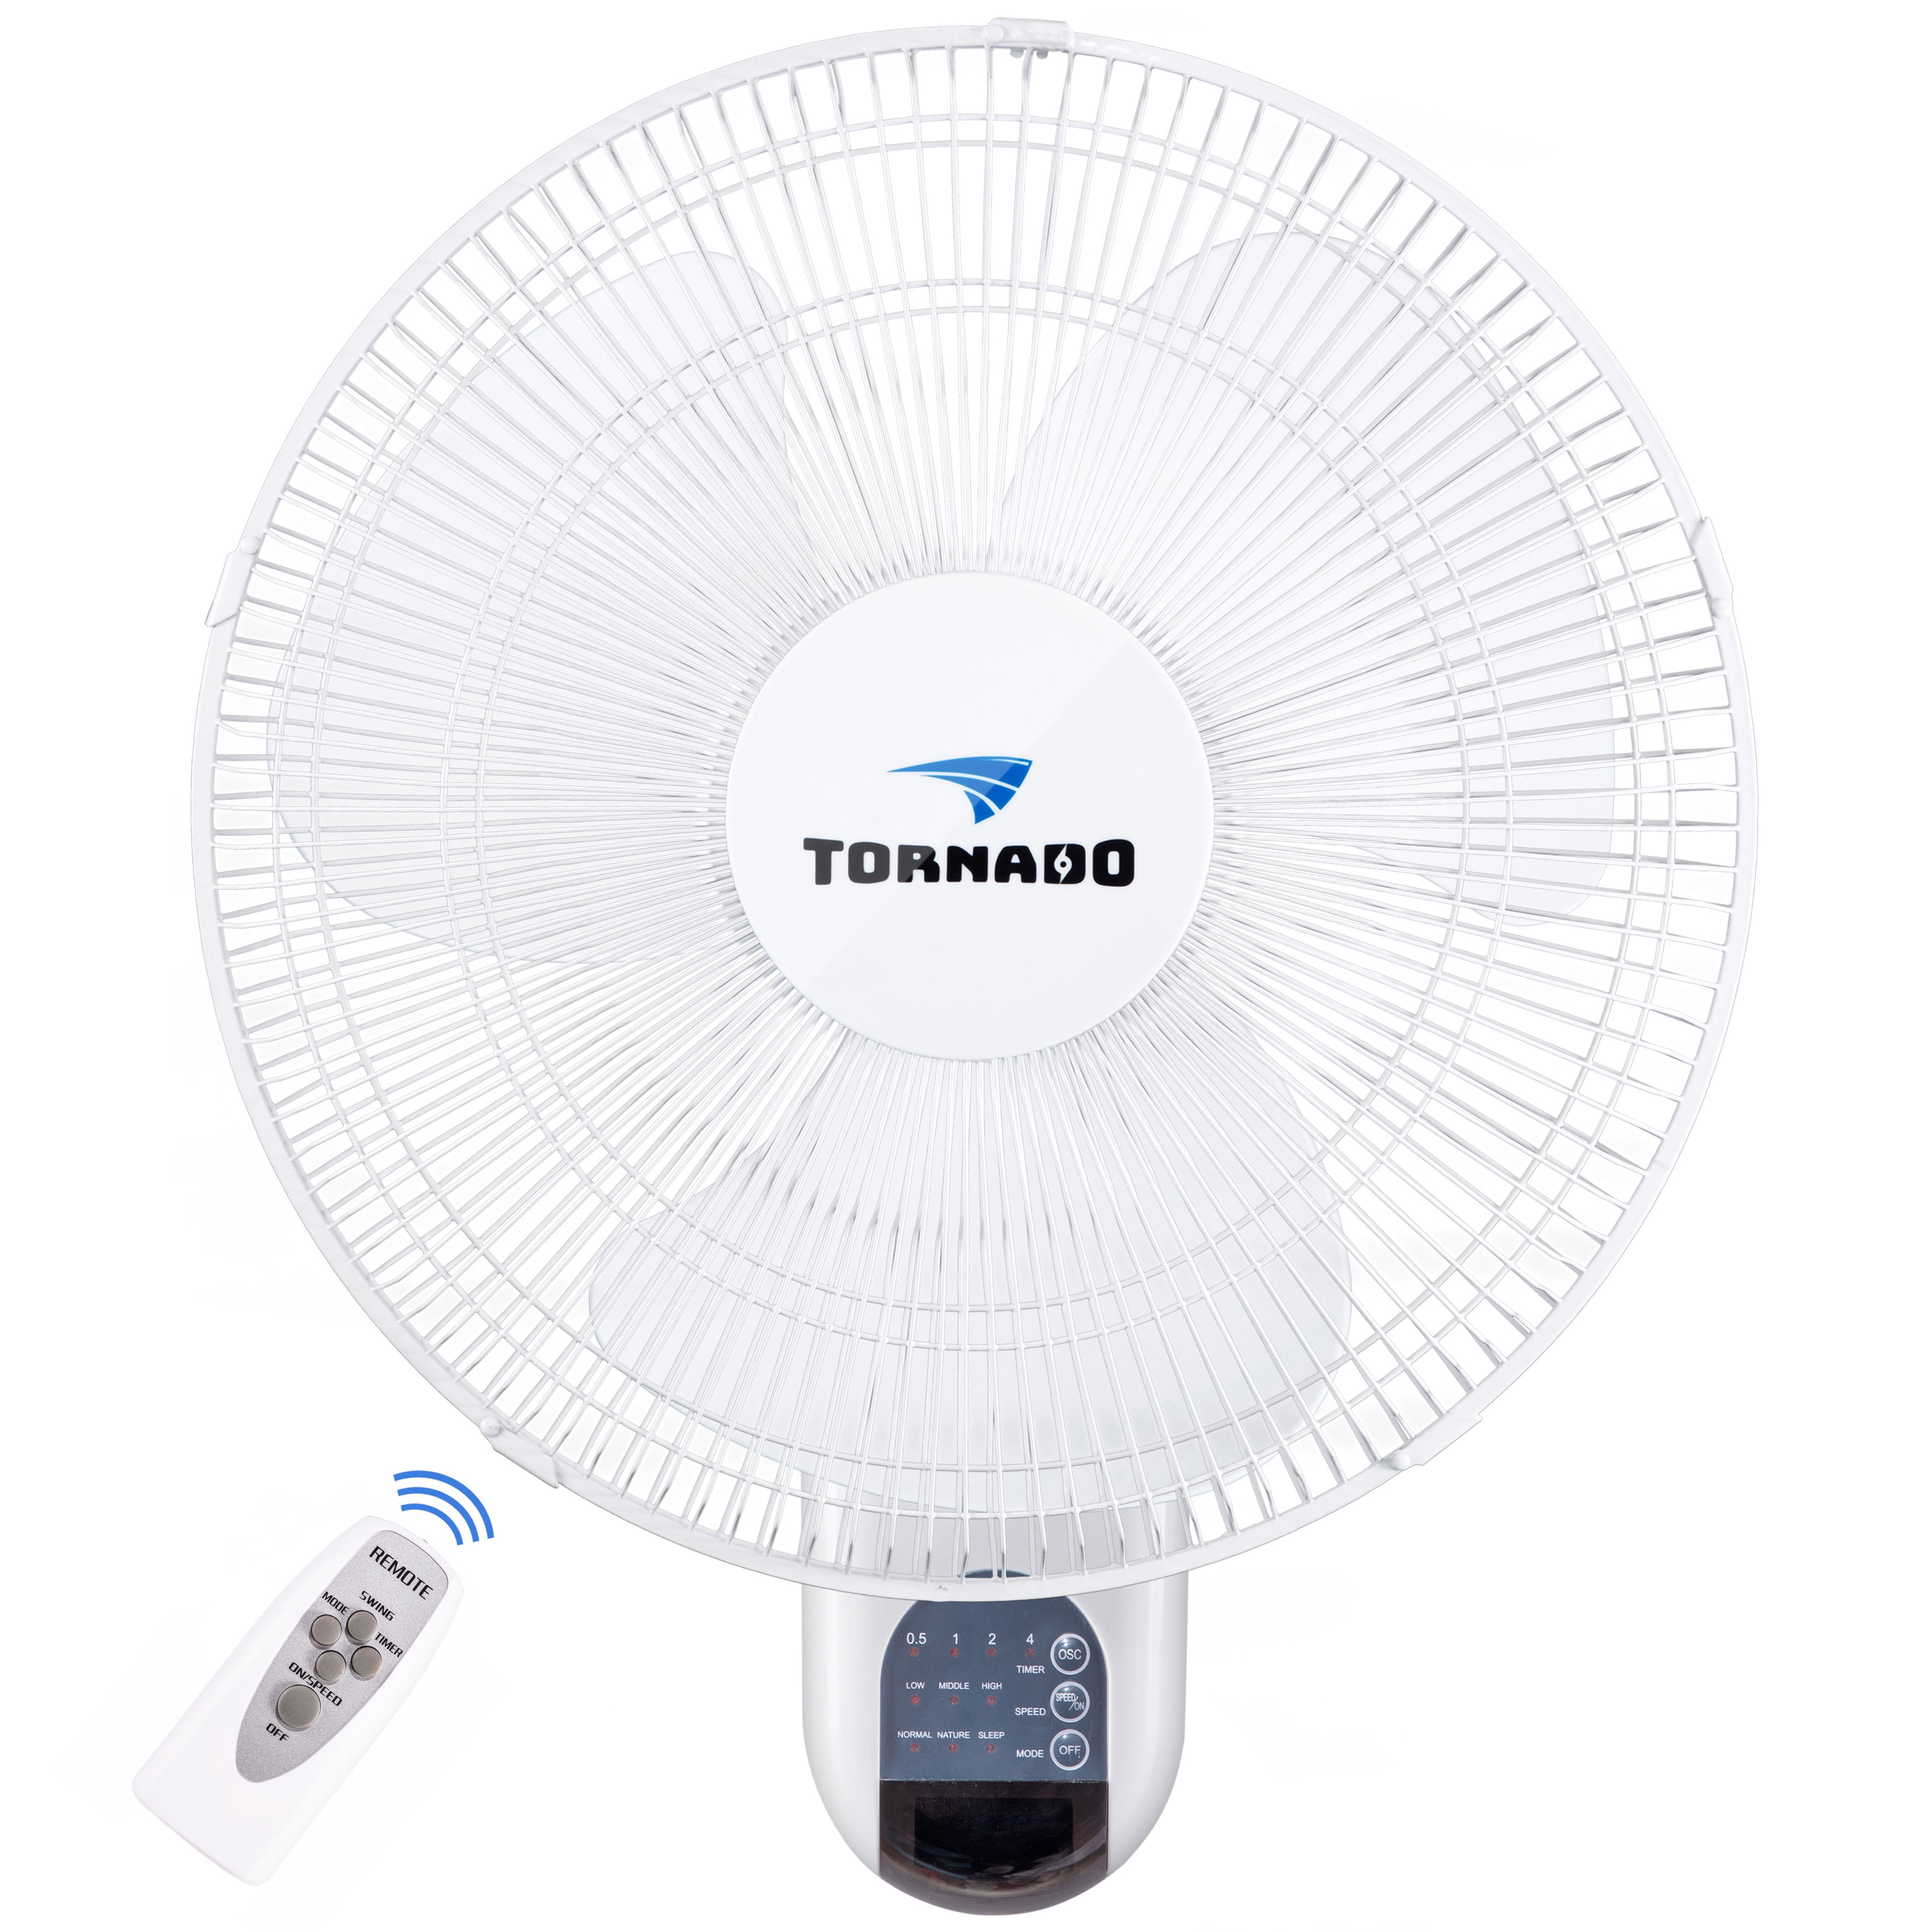 3 Oscillating Settings 3 Speed Settings UL Safety Listed Remote Control Included Tornado 16 Inch Digital Wall Mount Fan 65 Inches Power Cord 